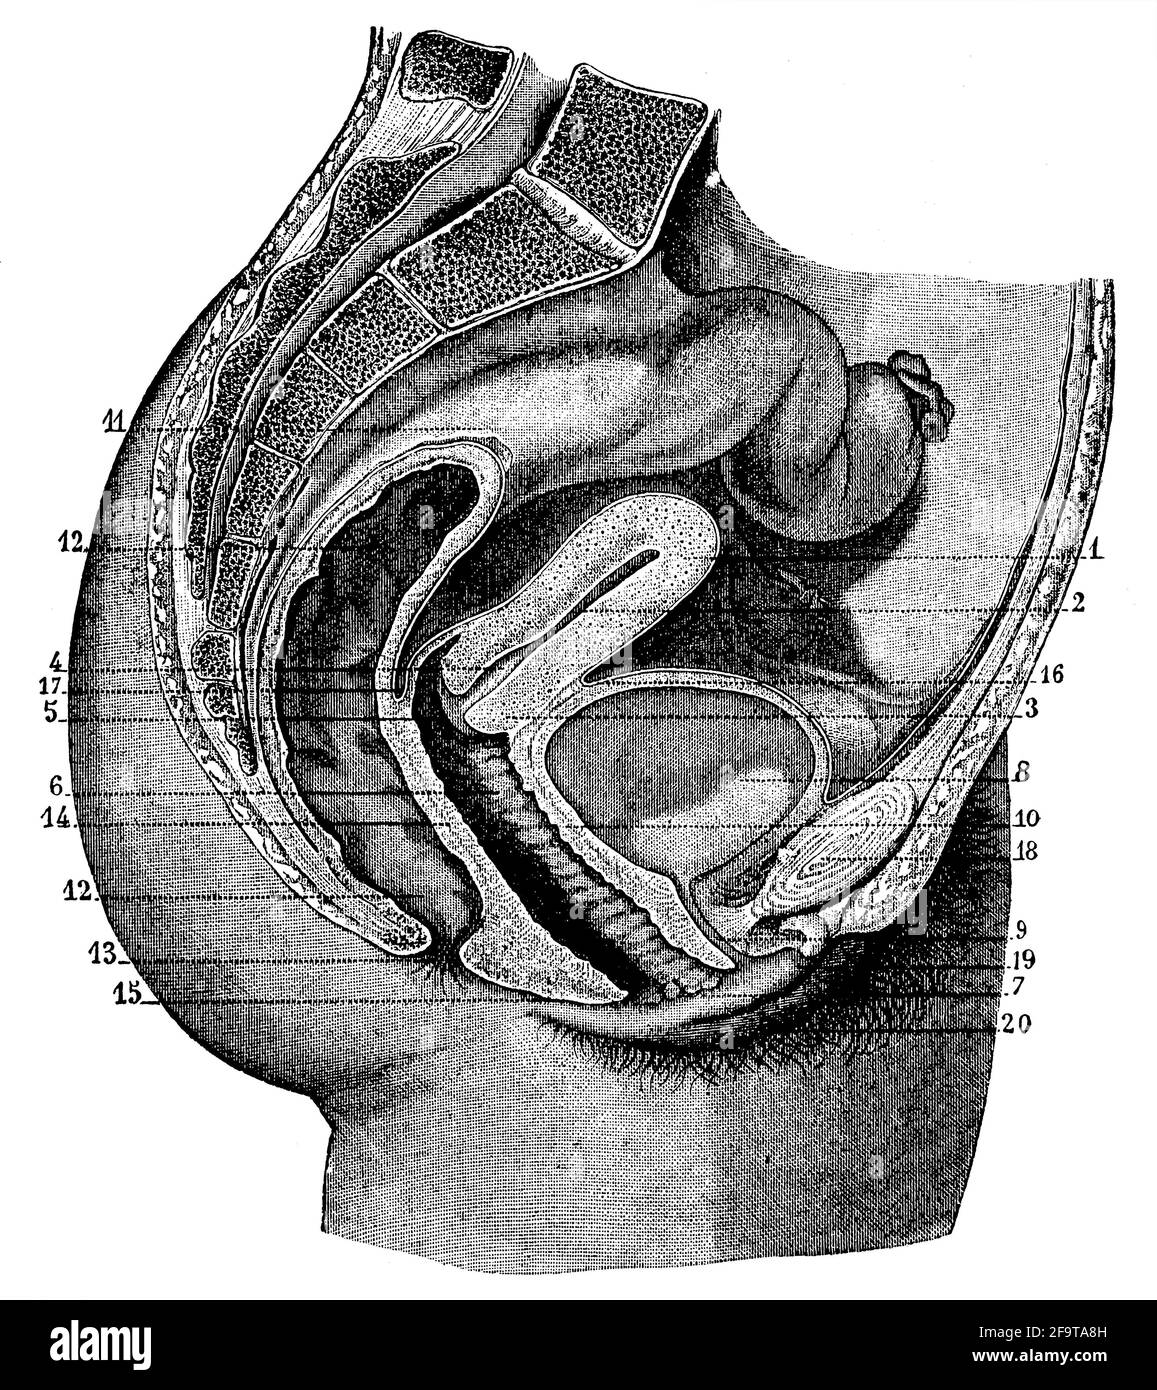 The female reproductive system (sagittal view). Illustration of the 19th century. Germany. White background. Stock Photo